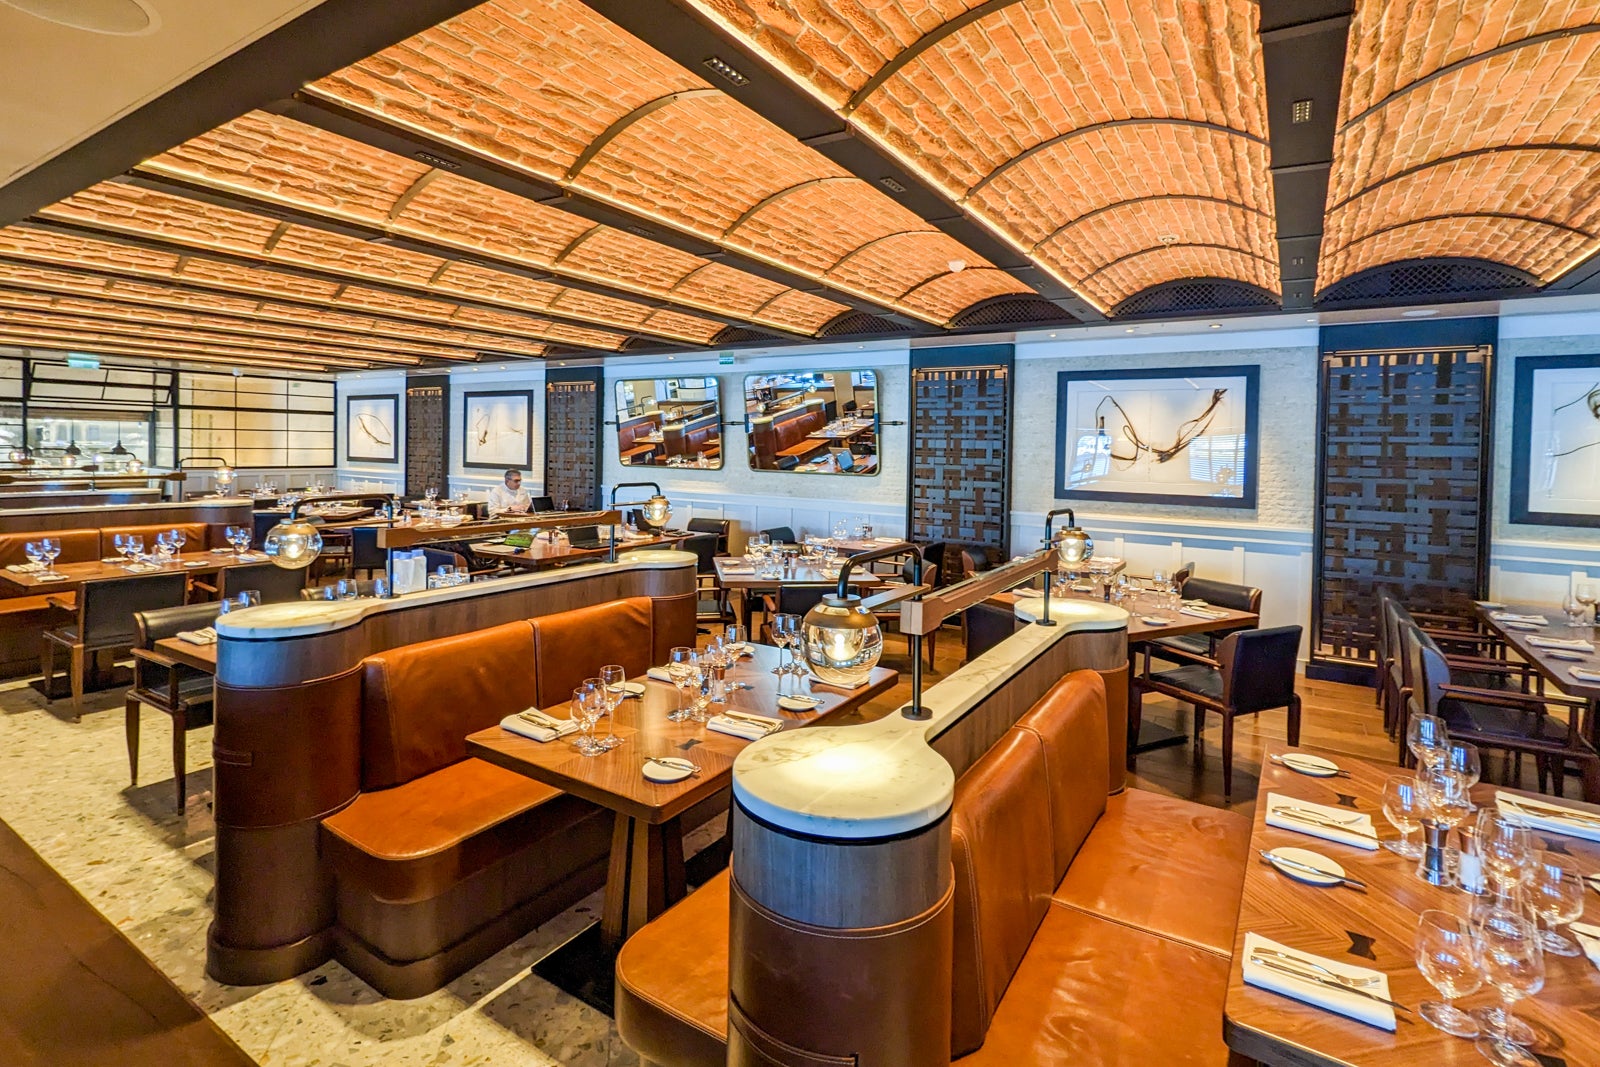 Brick-style ceiling in cruise ship American restaurant